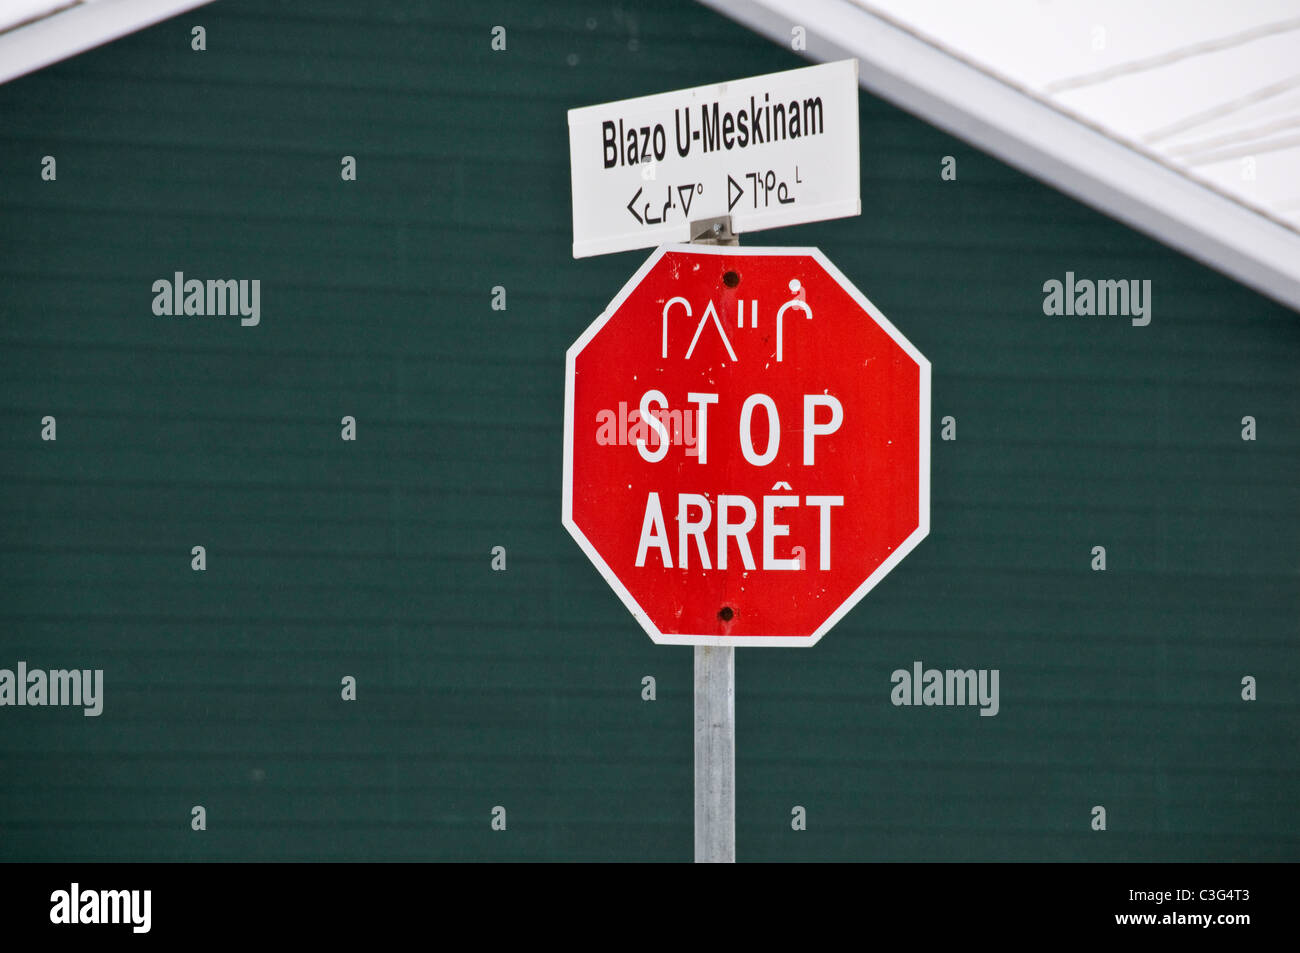 Stop sign in french, English and Cree languages in the Cree community of Mistissini Northern Quebec Canada Stock Photo